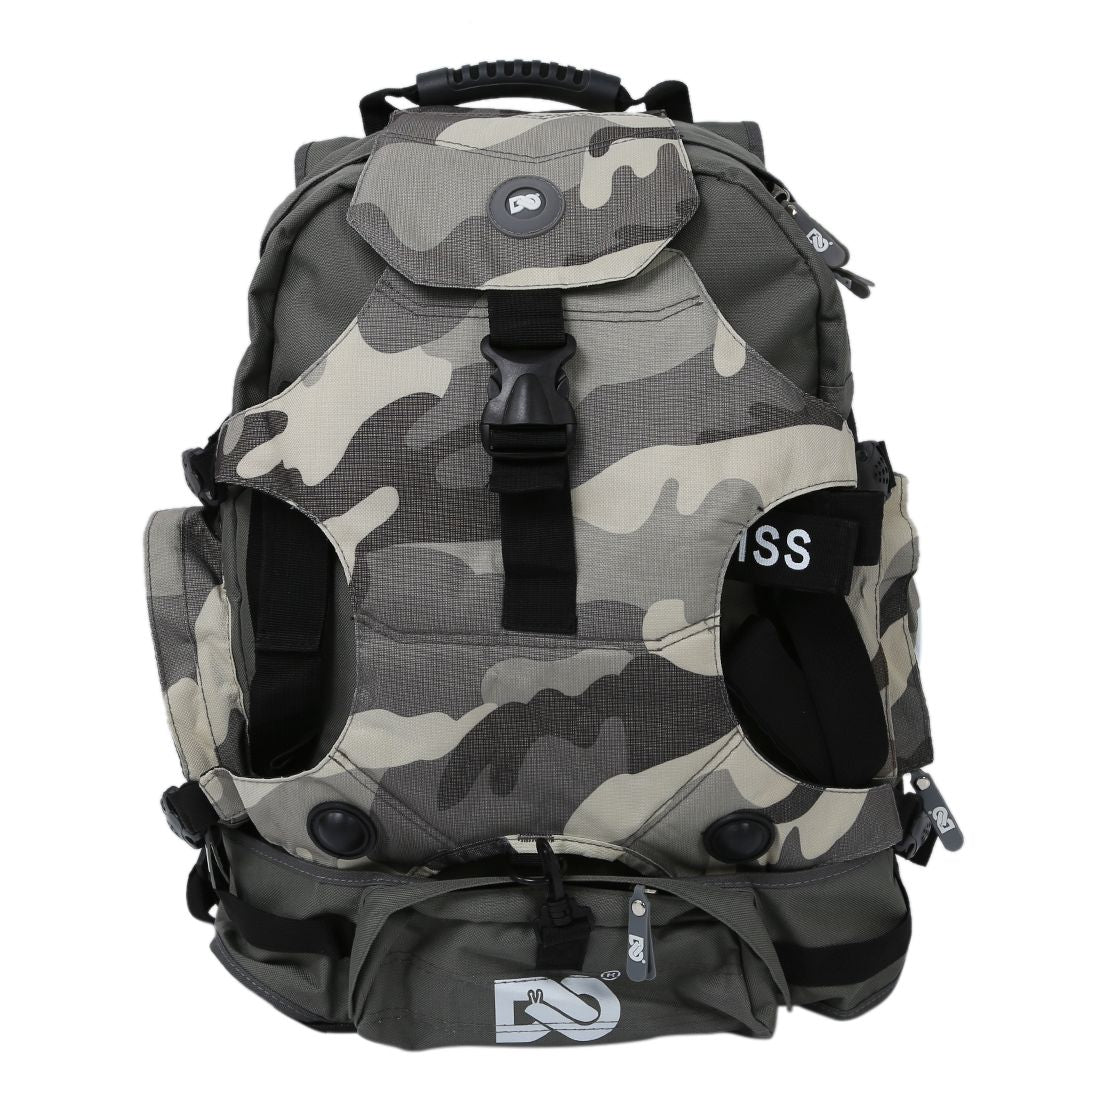 New Camo Carrying Case Backpack Bag For DJI INSPIRE 1 Quadcopter - ebowsos